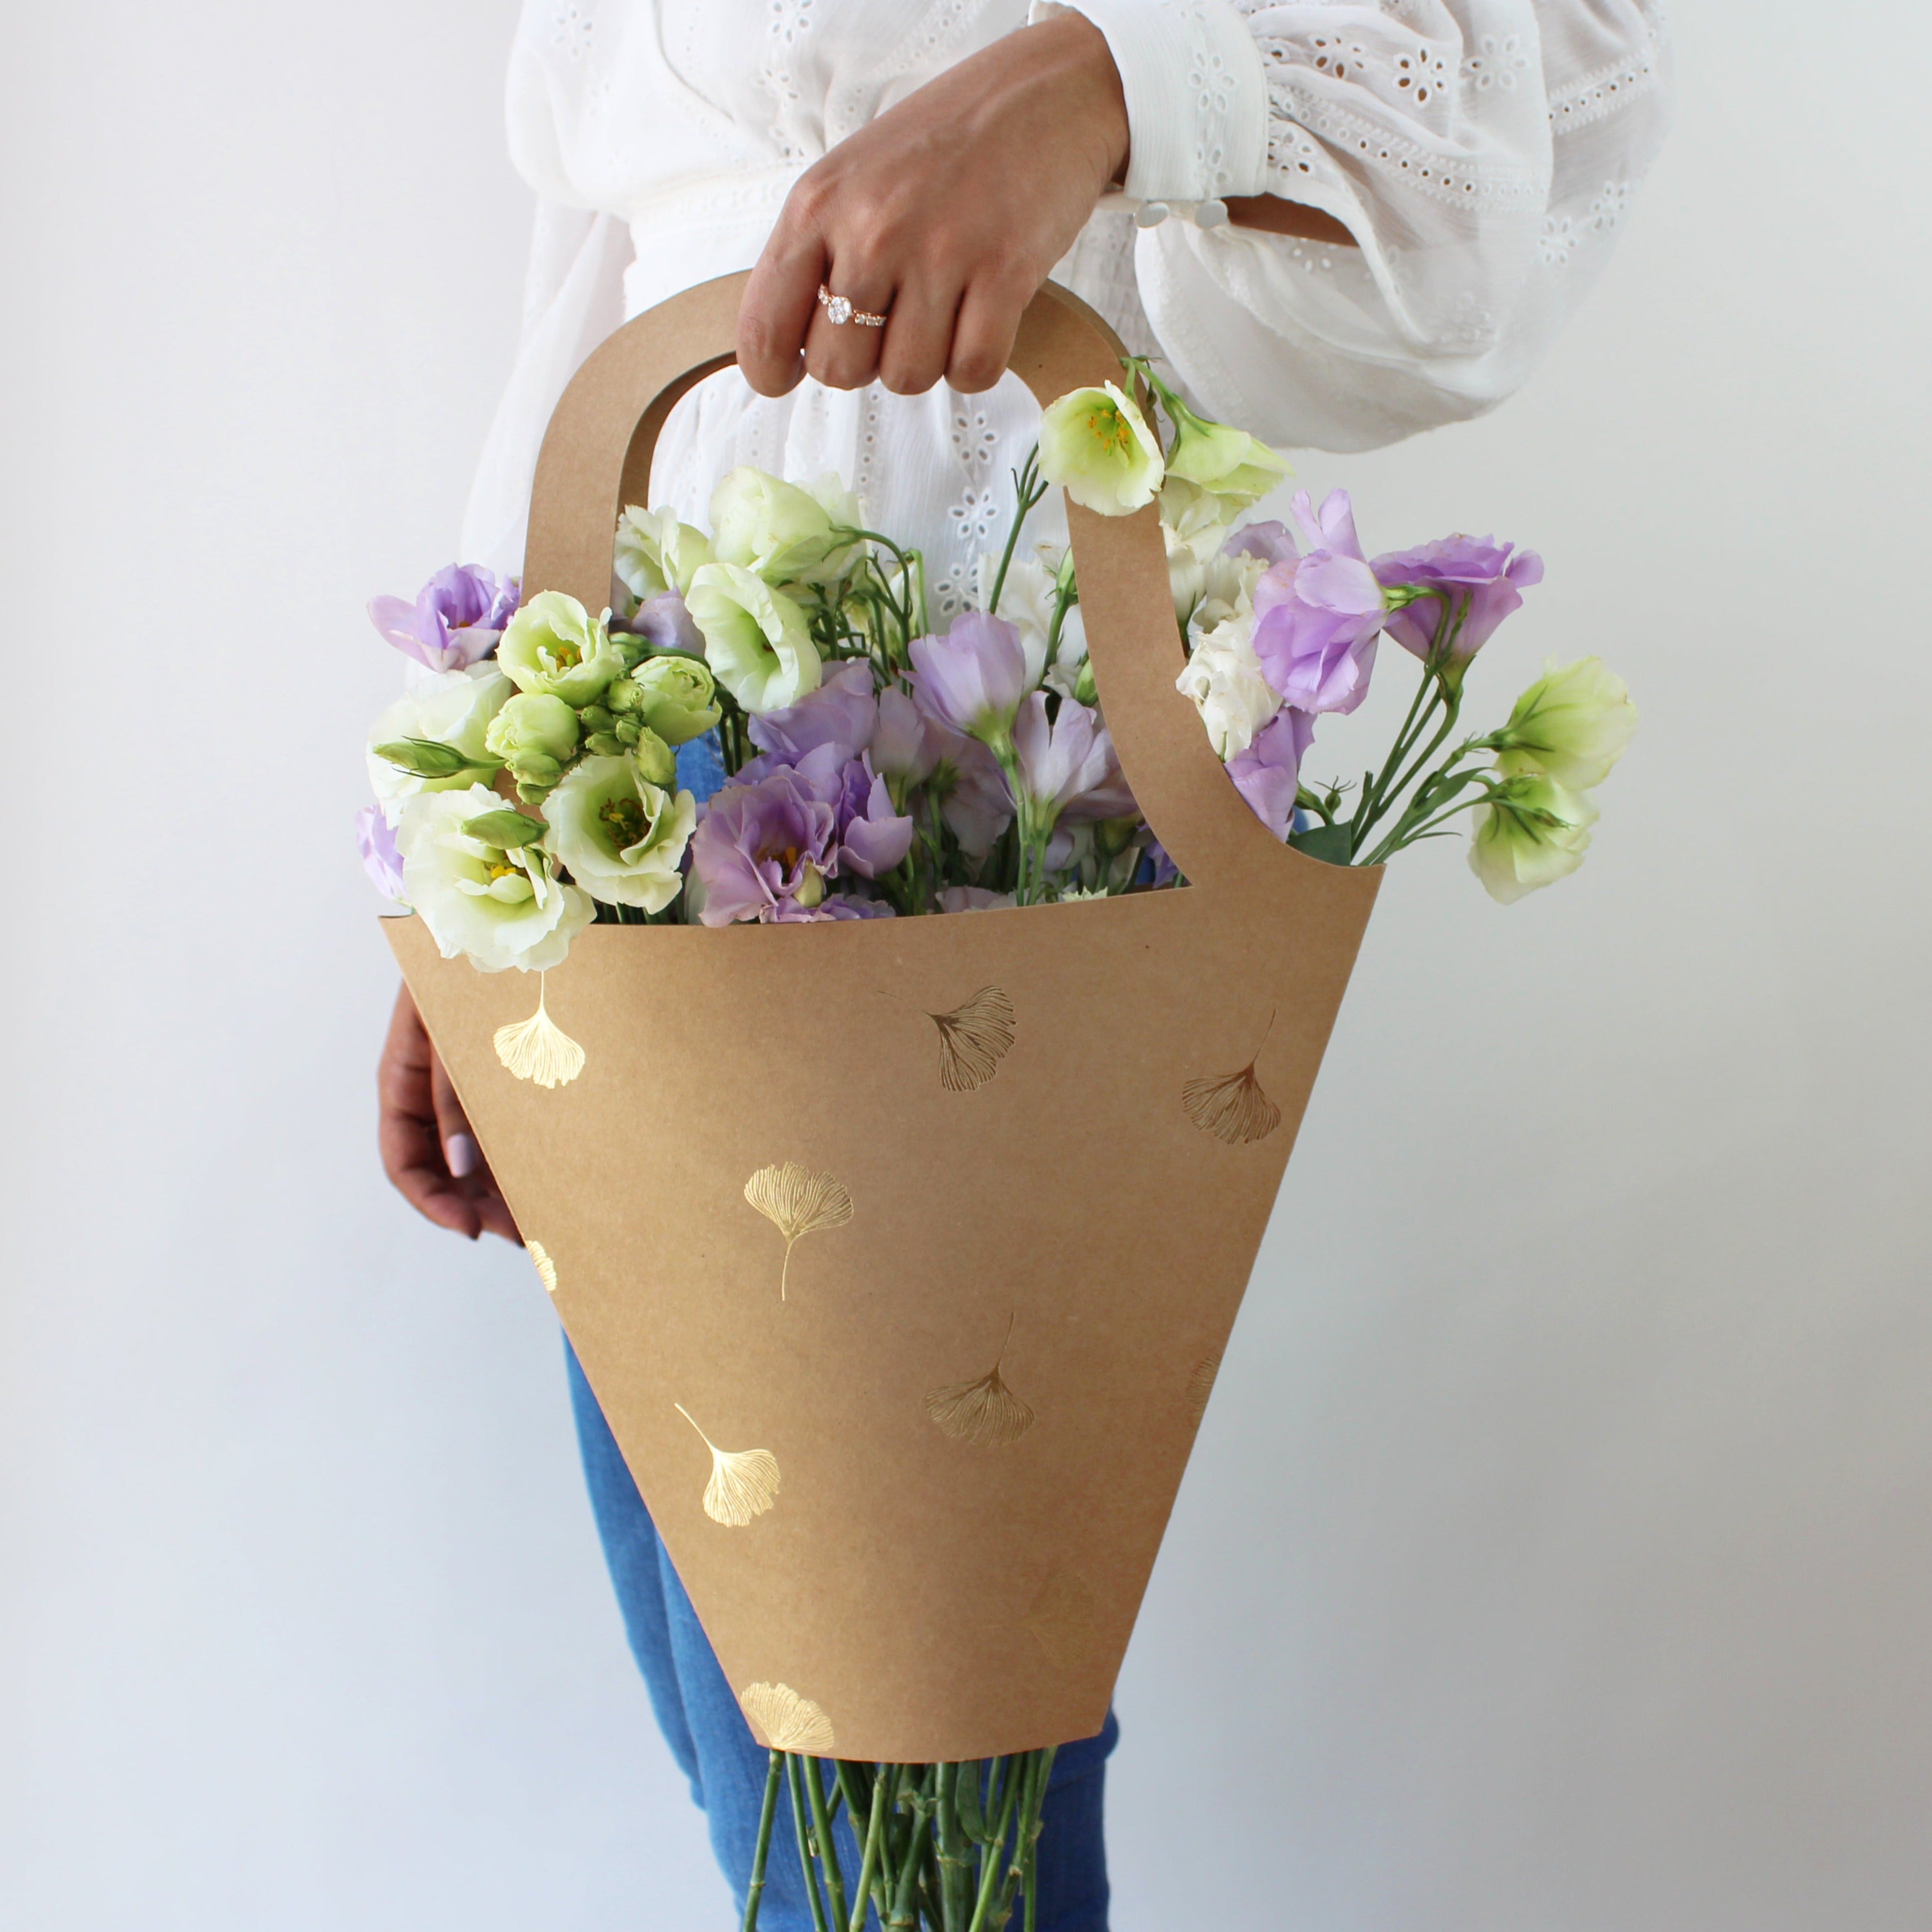 Pounded Flower Tote Bag for Mother's Day - DIY Candy